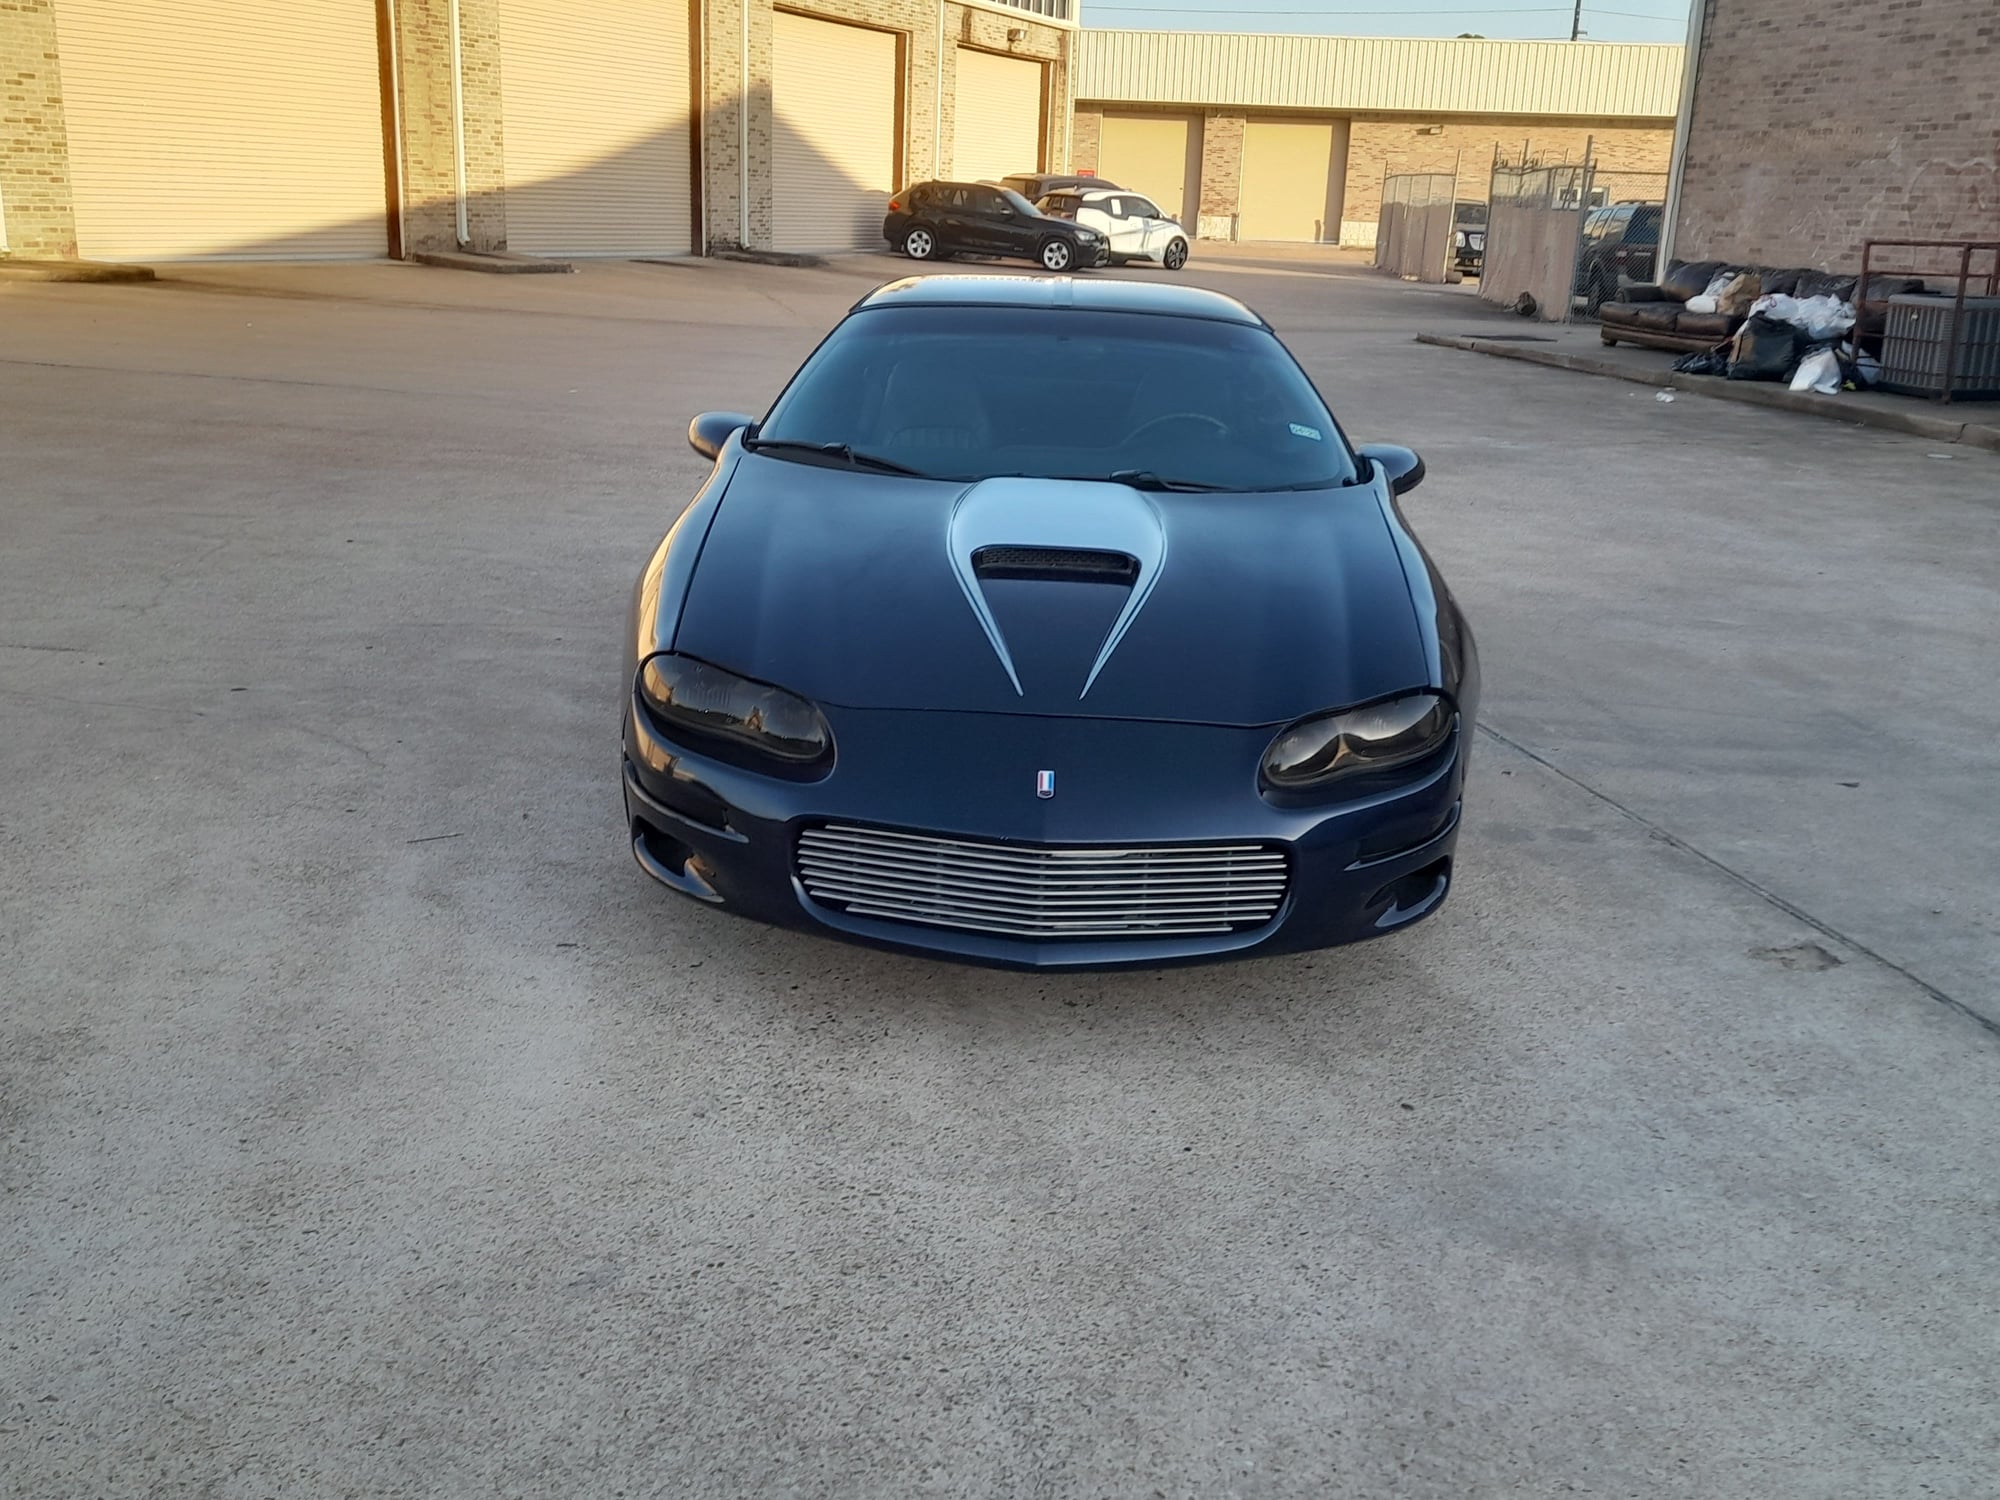 2002 Chevrolet Camaro - 2002 Chevrolet Camaro Z28 35th anniversary 6-Speed manual - Used - VIN 2G1FP22G322152585 - 89,000 Miles - 8 cyl - 2WD - Manual - Coupe - Blue - Houston, TX 77479, United States